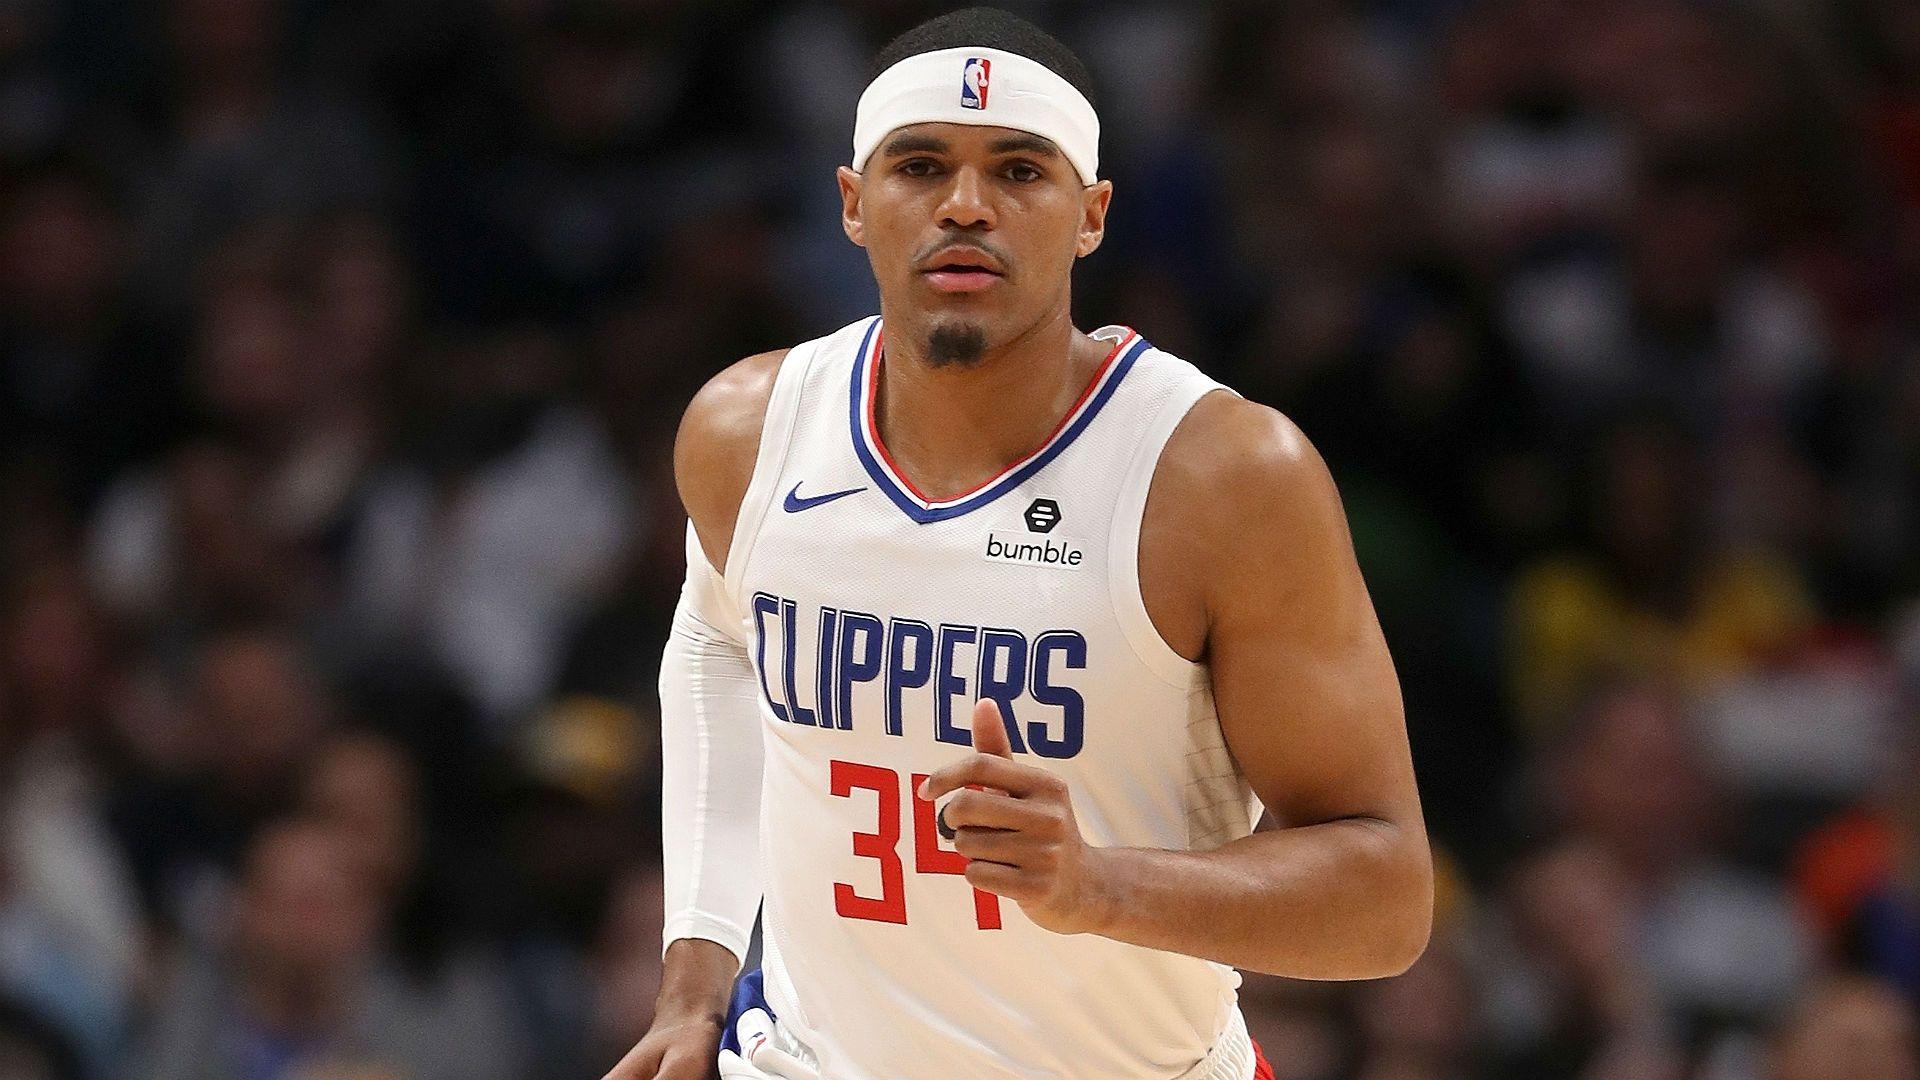 NBA rumors: Teams have inquired about Tobias Harris